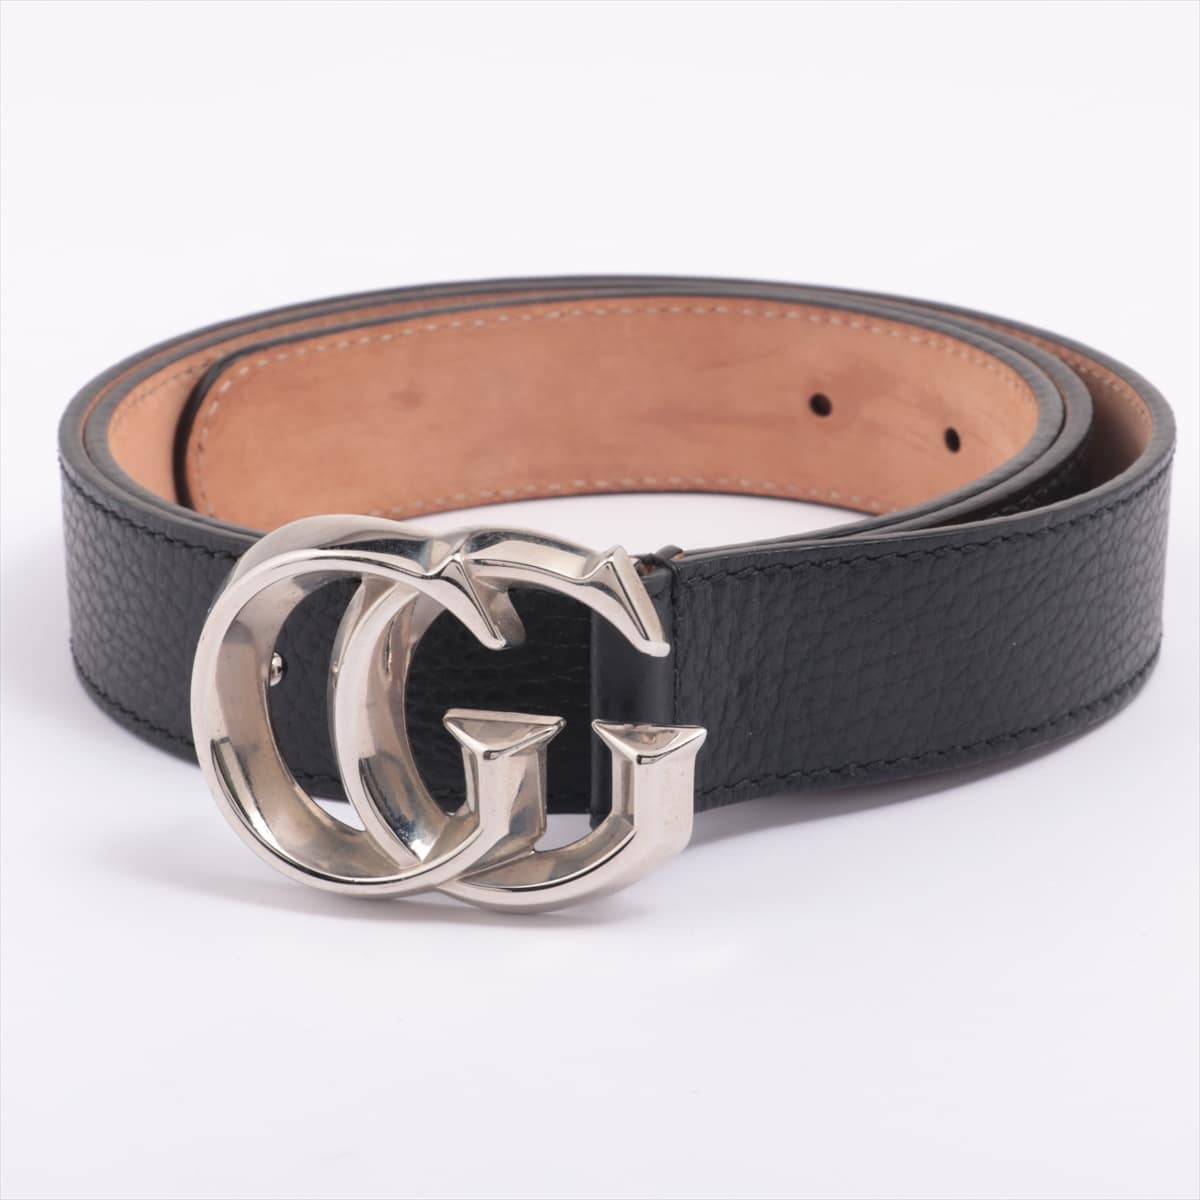 Gucci 480199 GG Marmont Belt Leather Black